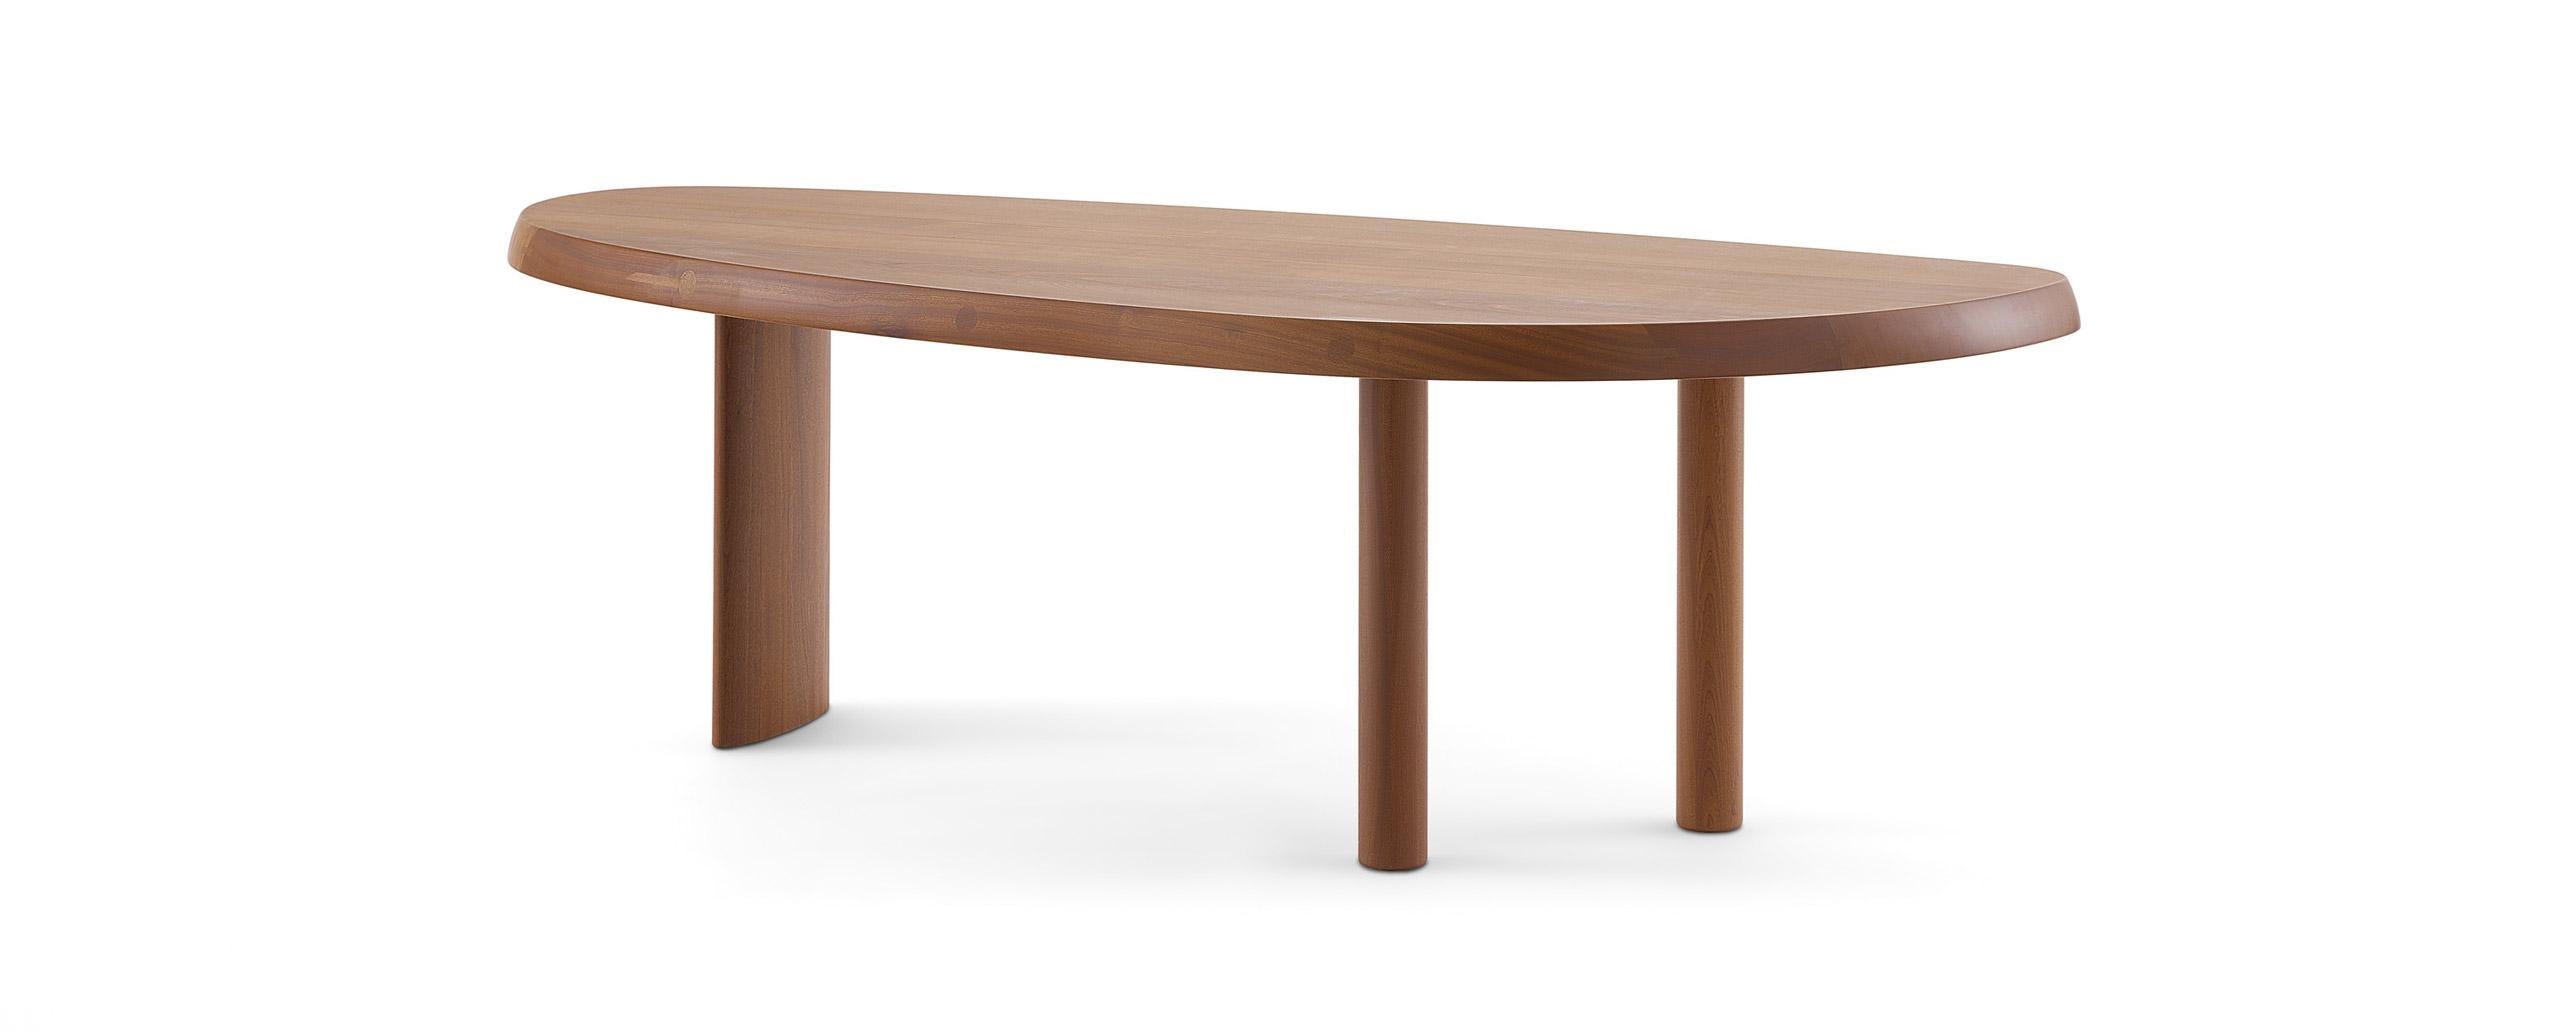 Charlotte Perriand Table En Forme Libre, Sage Green Lacquered Wood by Cassina 1